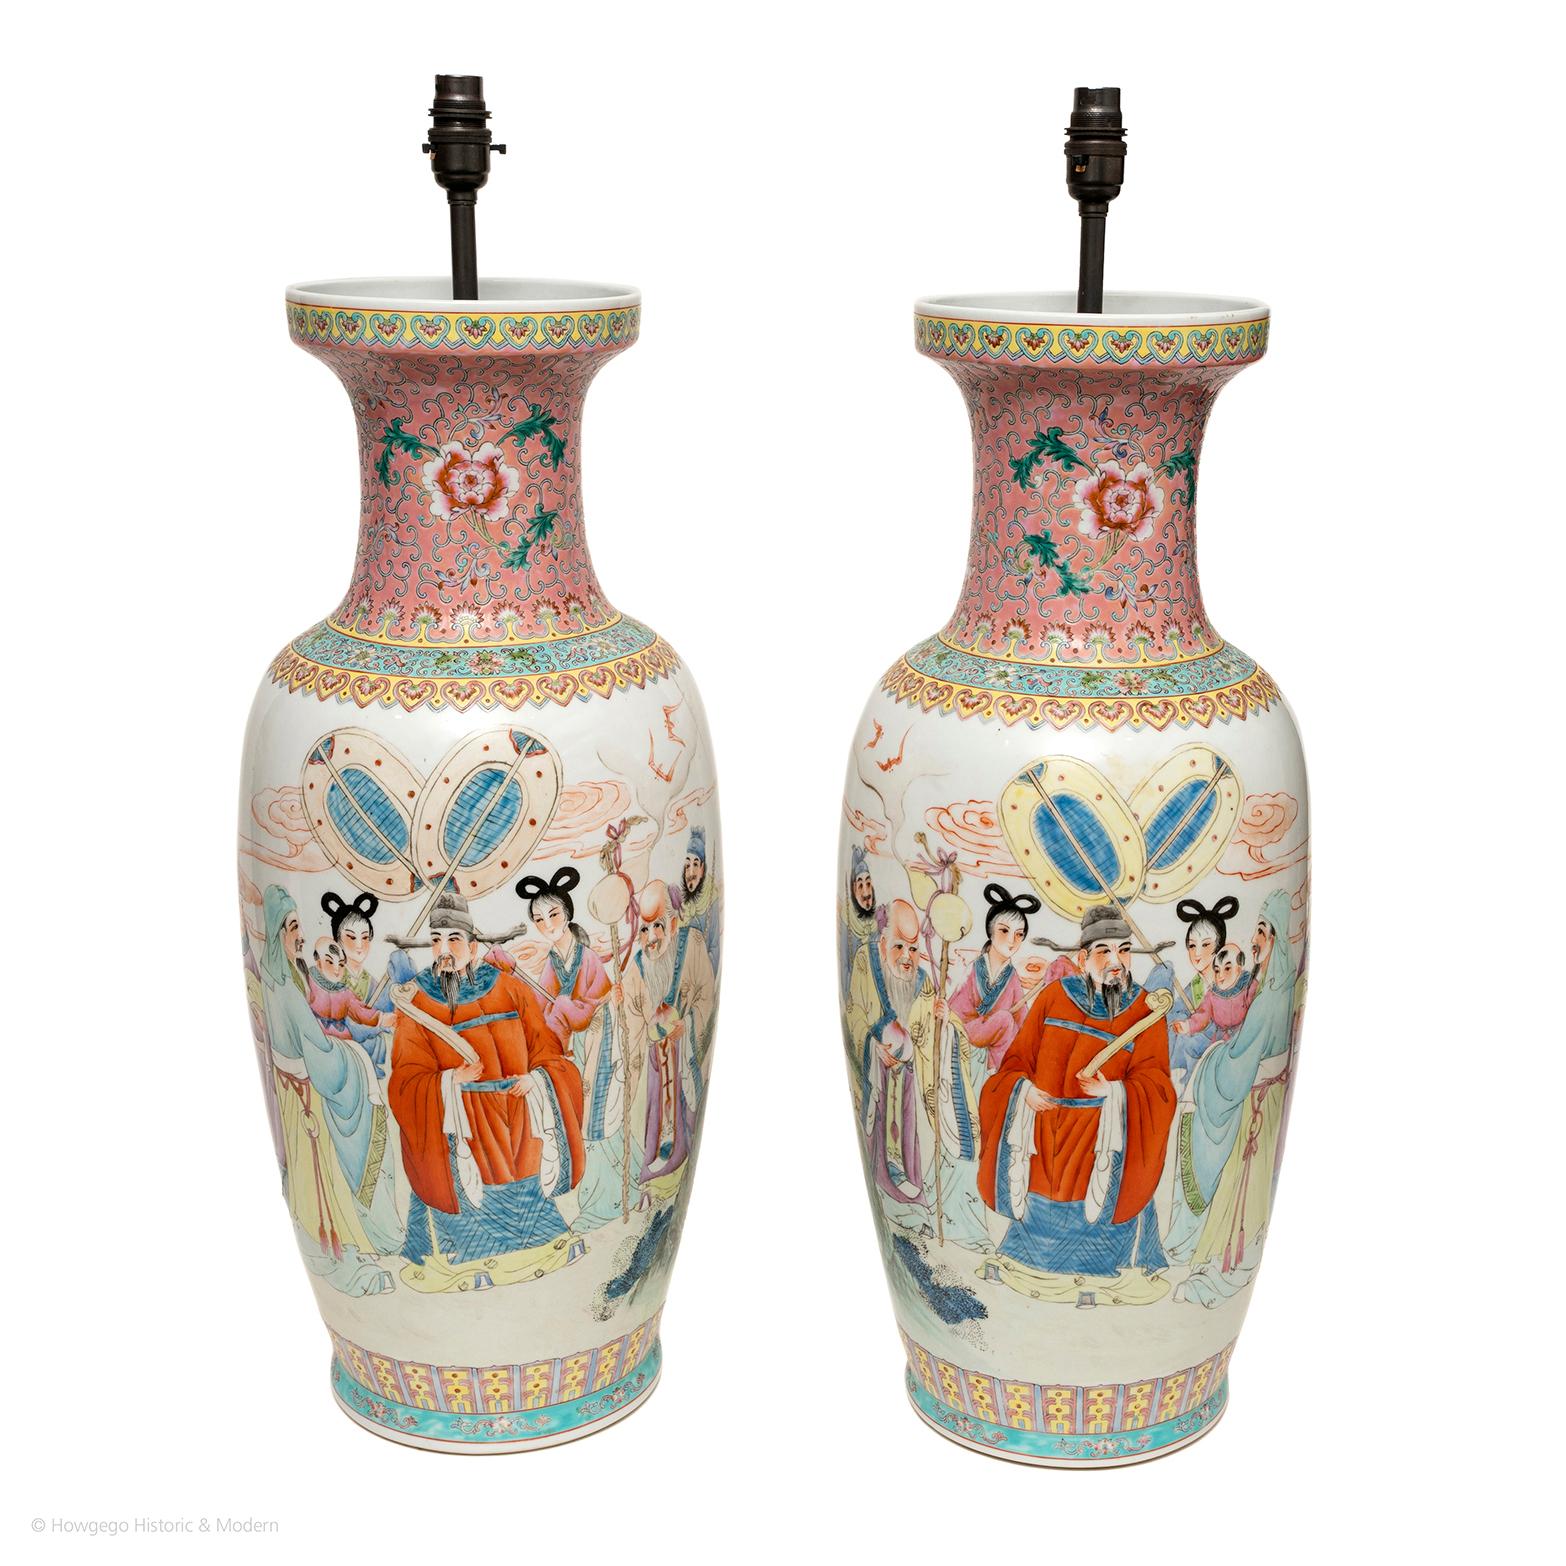 MASSIVE, PAIR OF VINTAGE, CHINOISERIE, PORCELAIN VASES, UPCYCLED INTO TABLE LAMPS, 70cm., 27½” high
The massive size is softened by the pastel shades of pink, yellow, blue, green.
The form of the vases is fluid and soft.
Painted with a ceremony